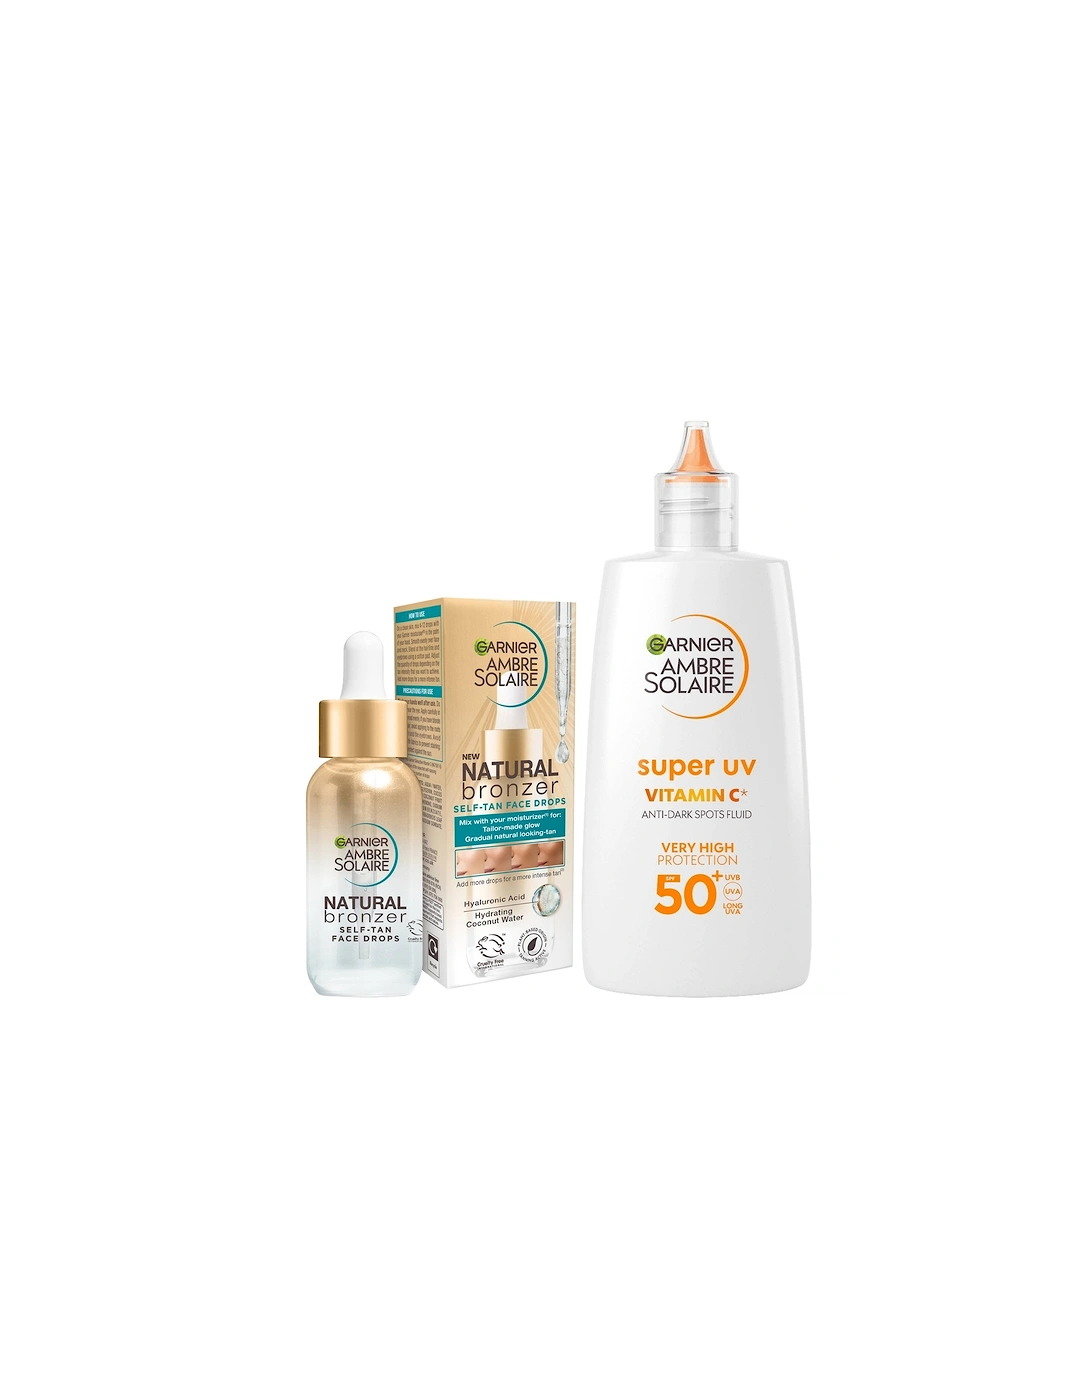 Glow and Protect Duo: Natural Bronzer Self-Tan Drops and Ambre Solaire Vitamin C Facial SPF50+ Fluid, 2 of 1